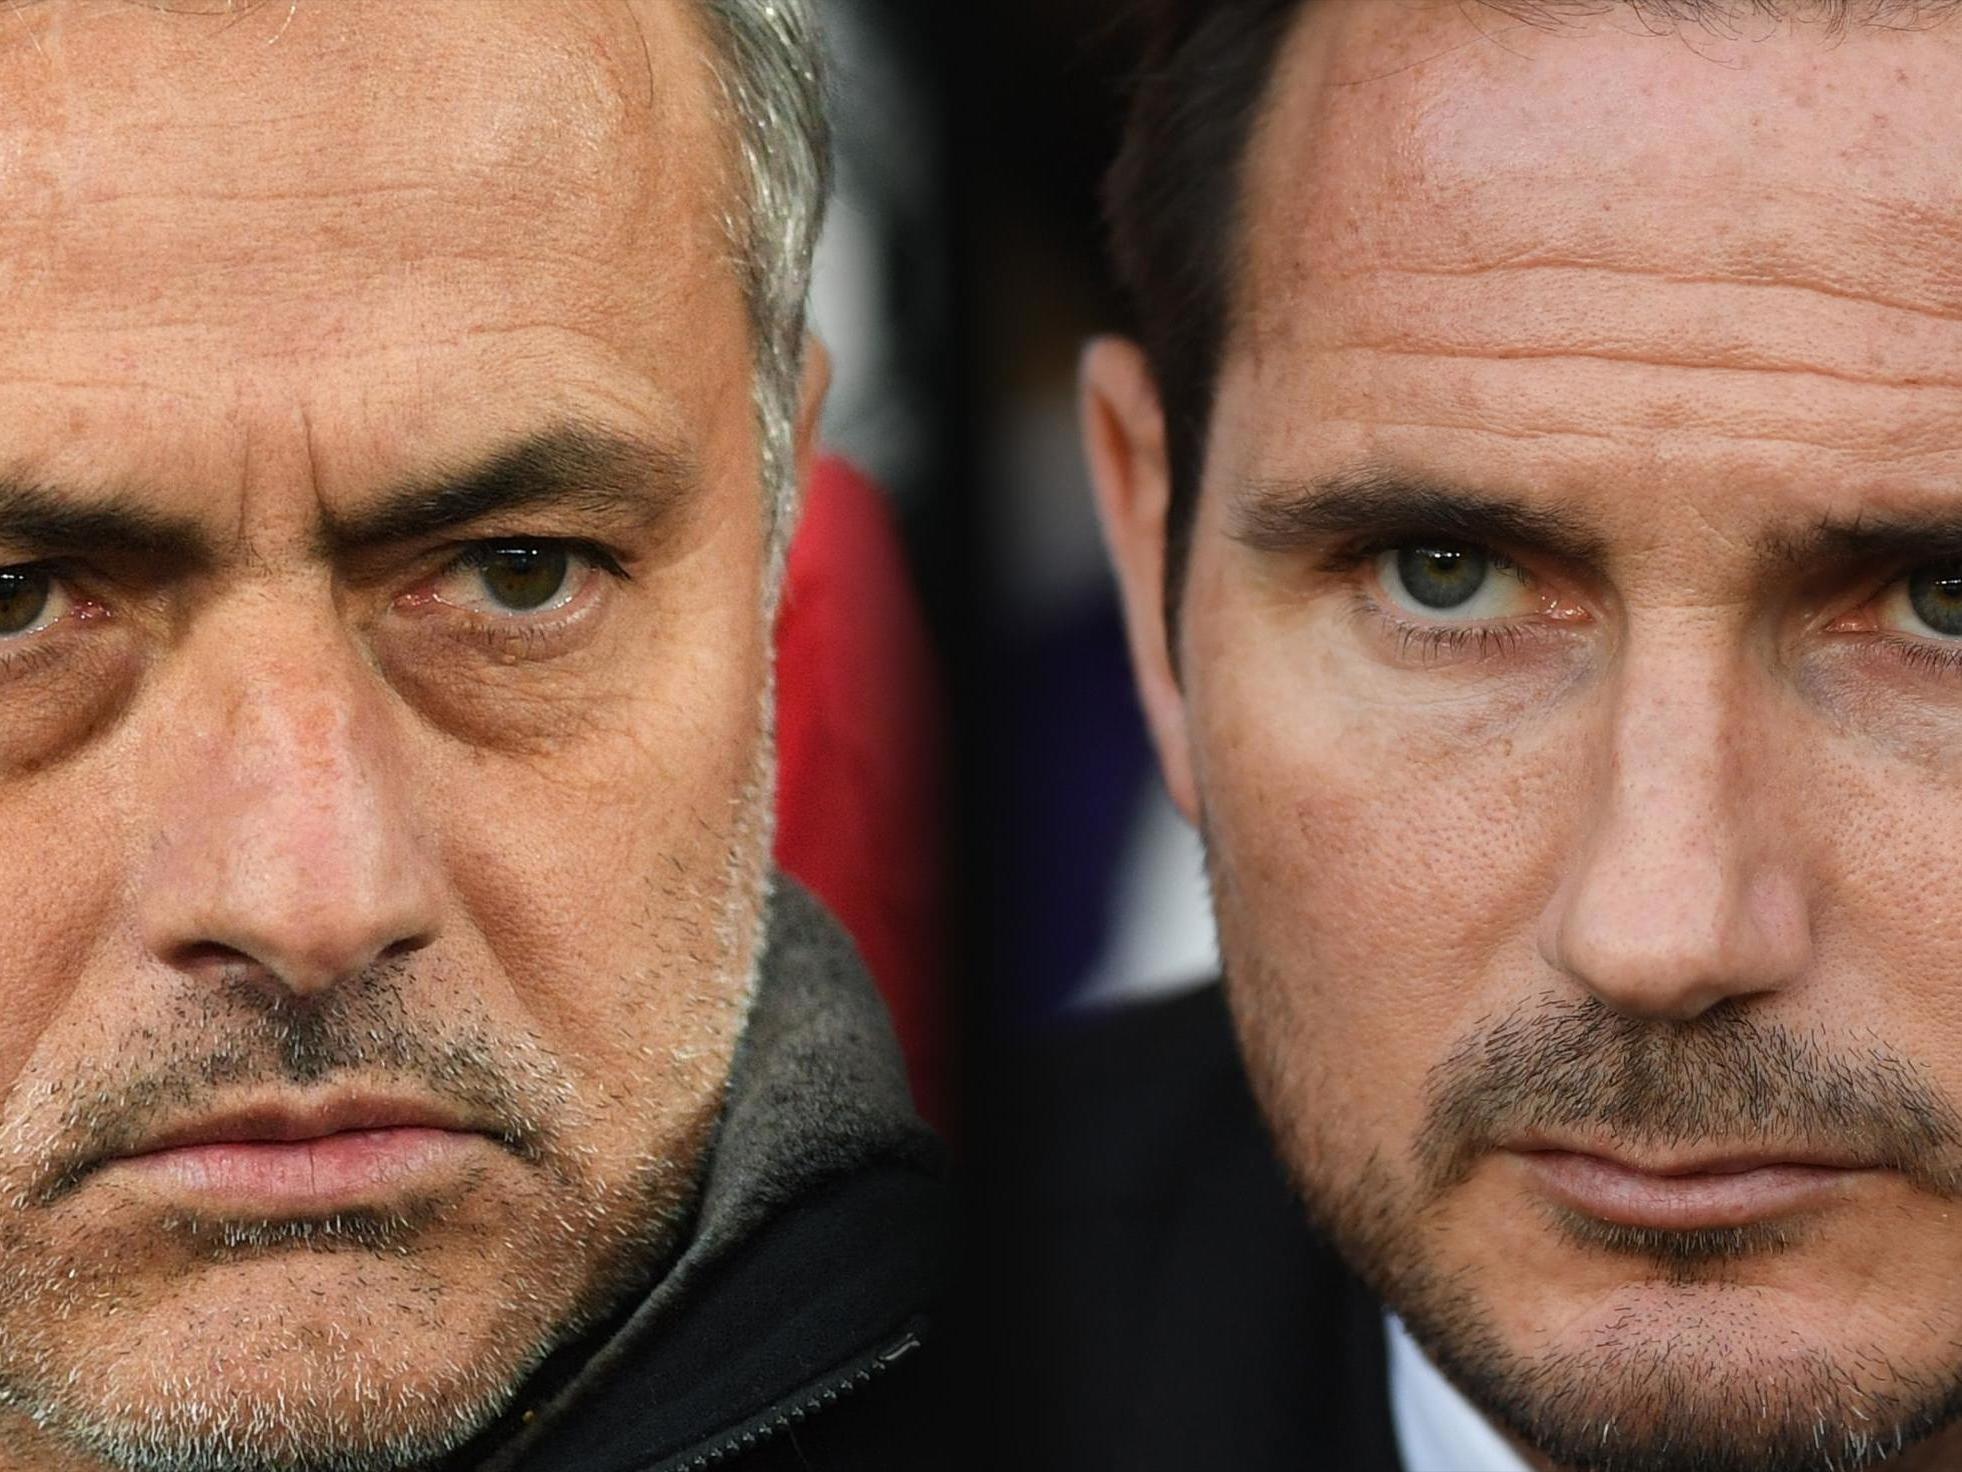 Mourinho takes on one of his former players in Lampard this weekend